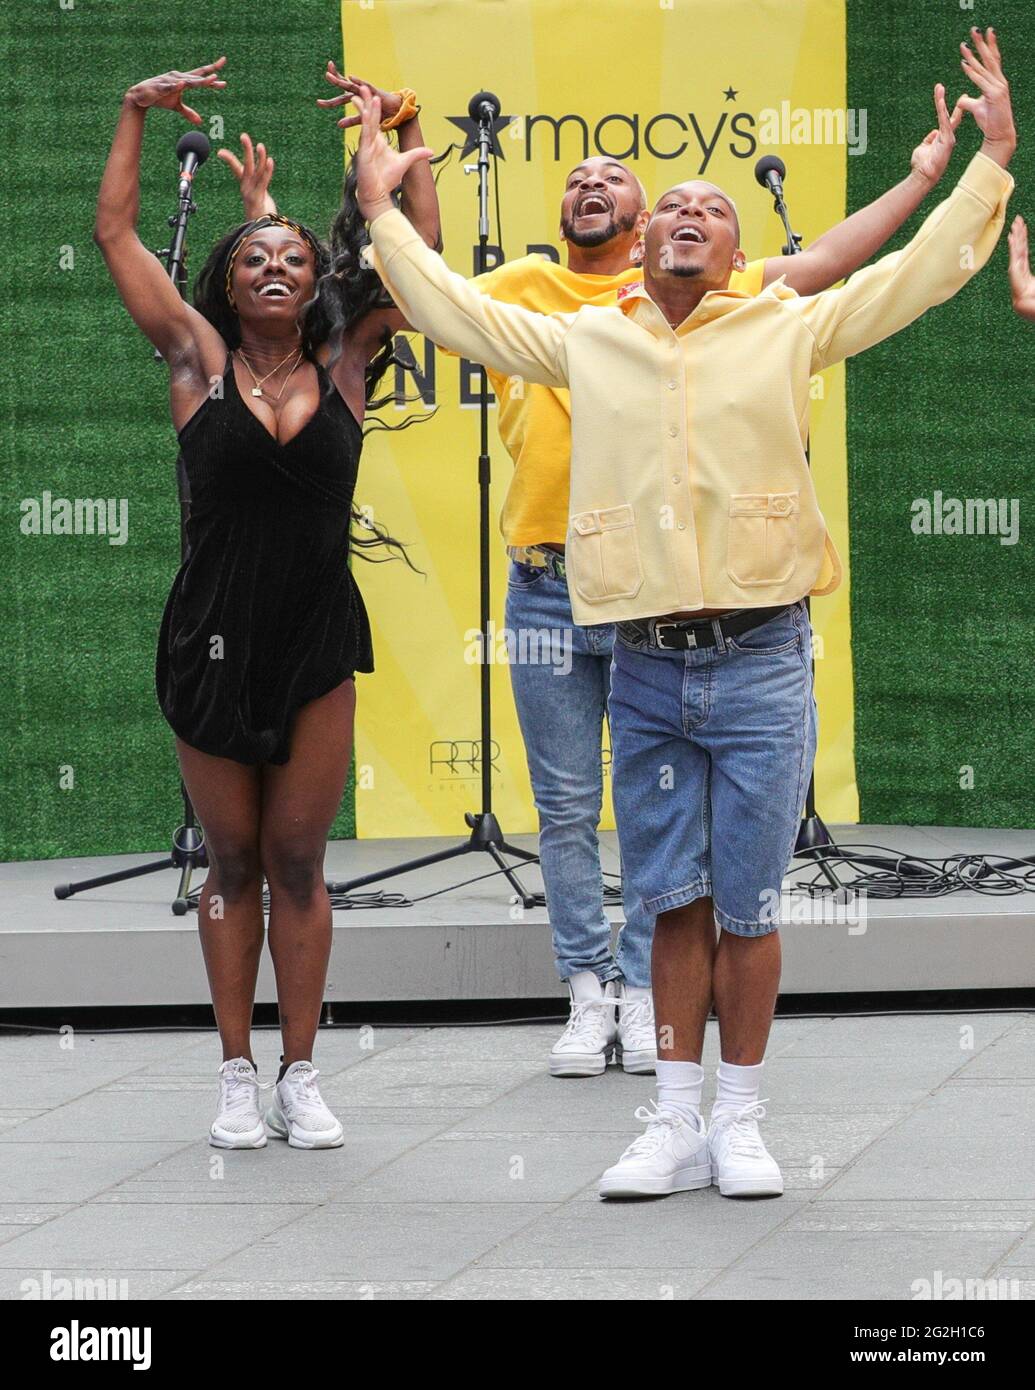 New York, NY, USA. 11th June, 2021. Dancers in attendance for Macy's and The Times Square Alliance Celebrate New York City Reopening After Covid, Times Square, New York, NY June 11, 2021. Credit: CJ Rivera/Everett Collection/Alamy Live News Stock Photo